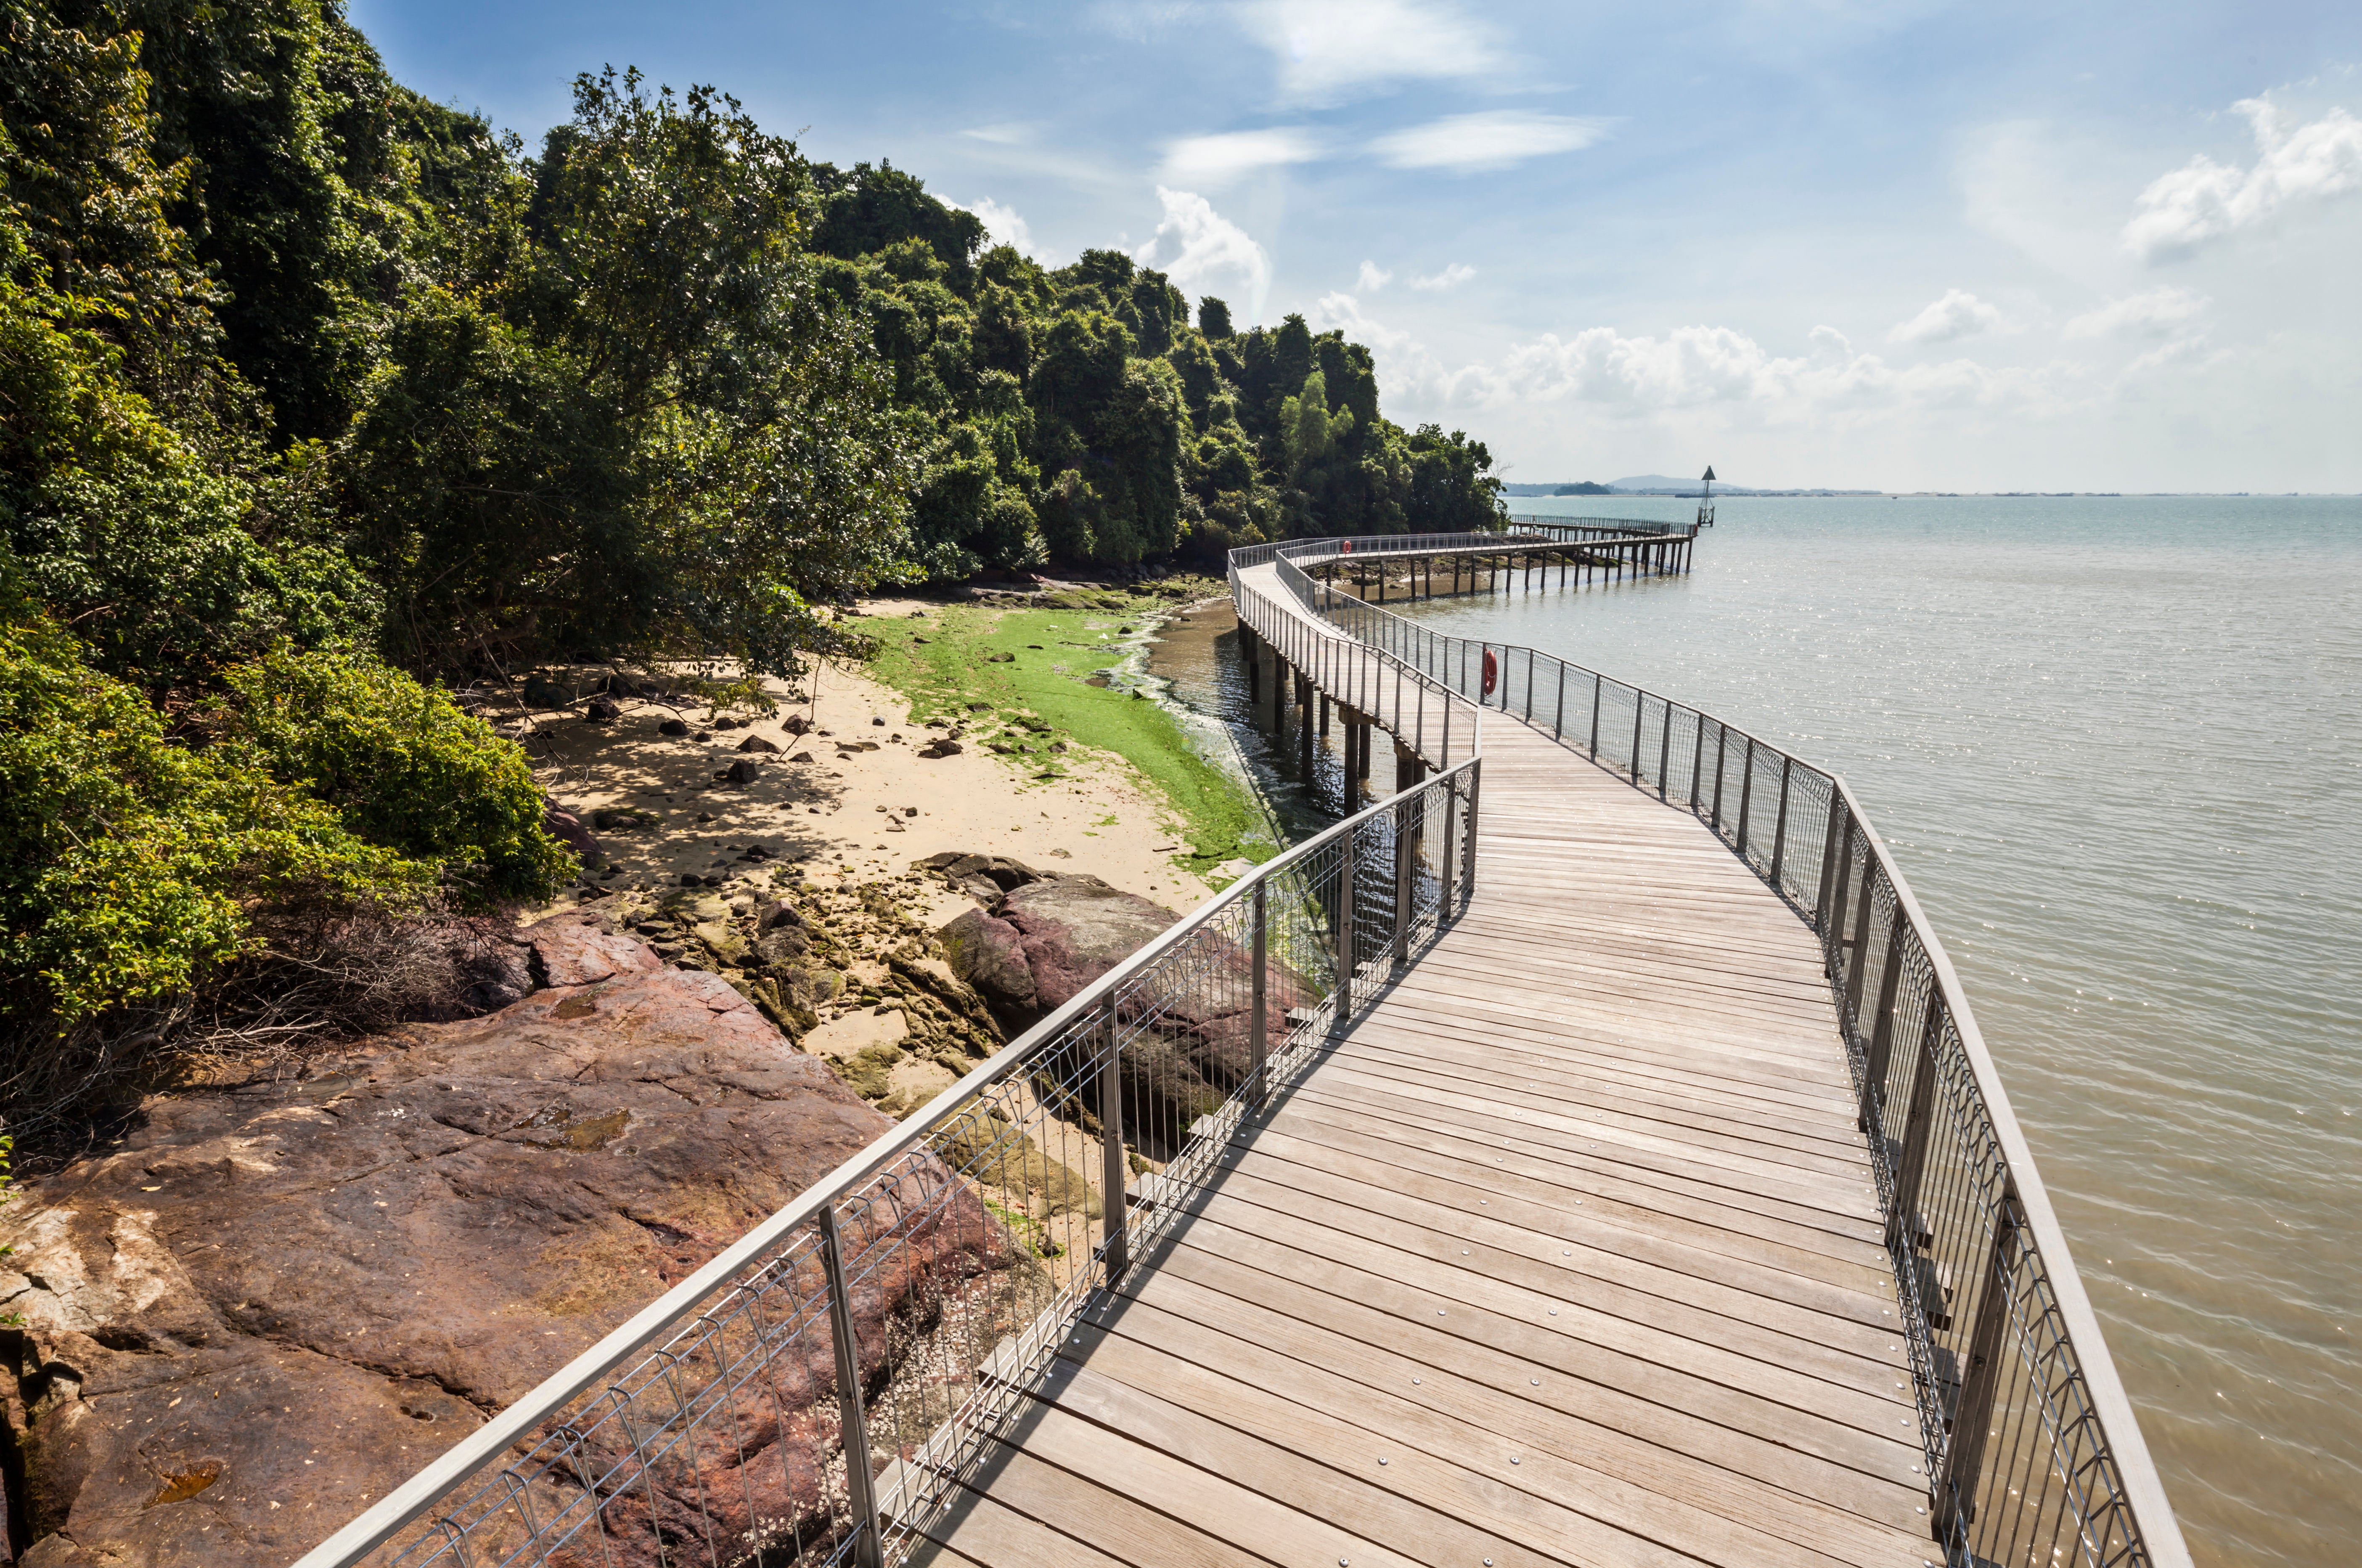 For an idyllic island adventure head to Pulau Ubin and enjoy its authentic, untouched beauty